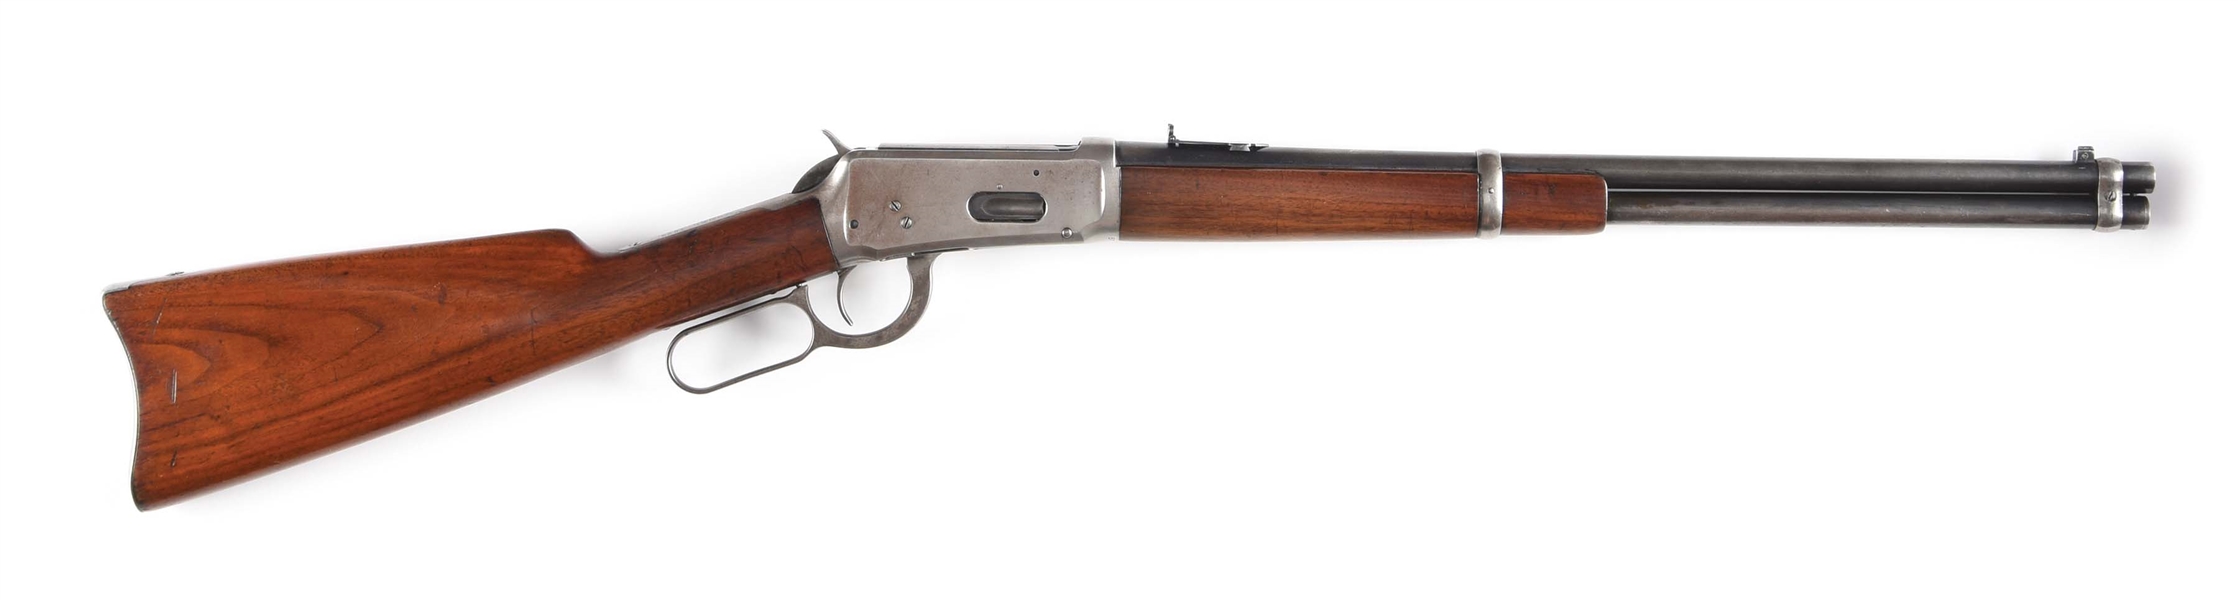 (C) WINCHESTER MODEL 1894 LEVER ACTION SADDLE RING CARBINE (1911).